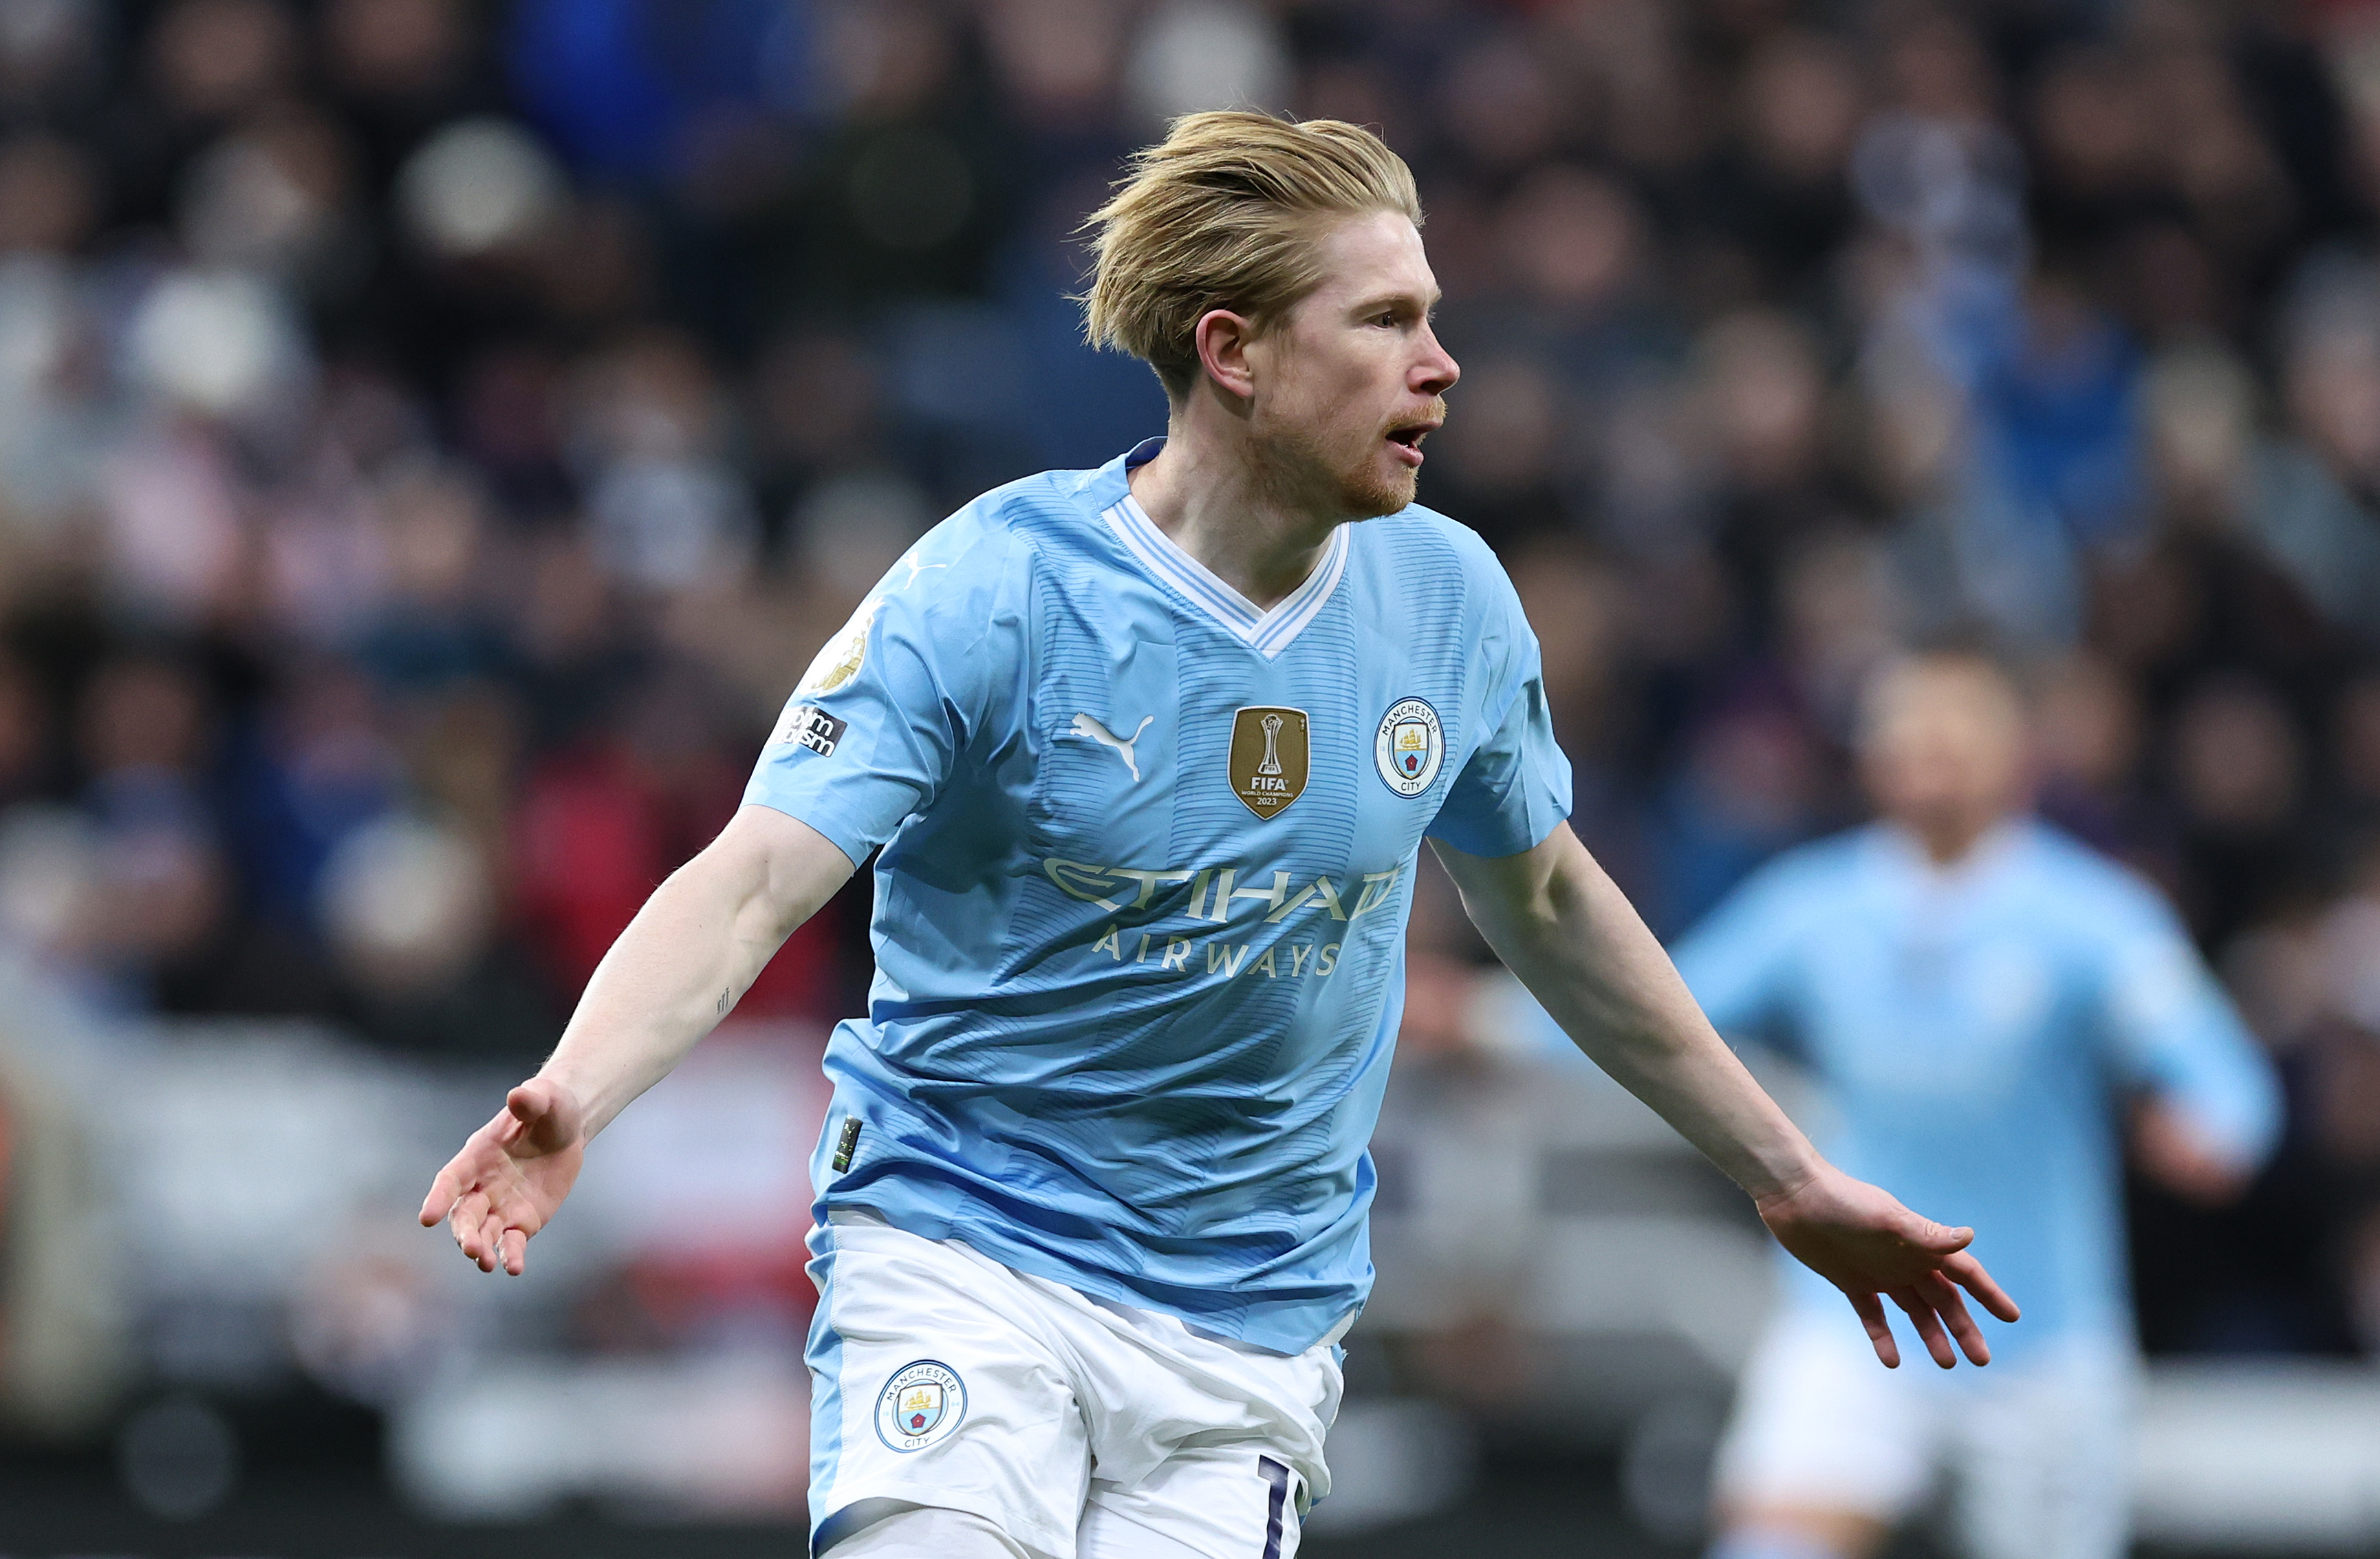 Will Kevin De Bruyne leave Man City this summer?